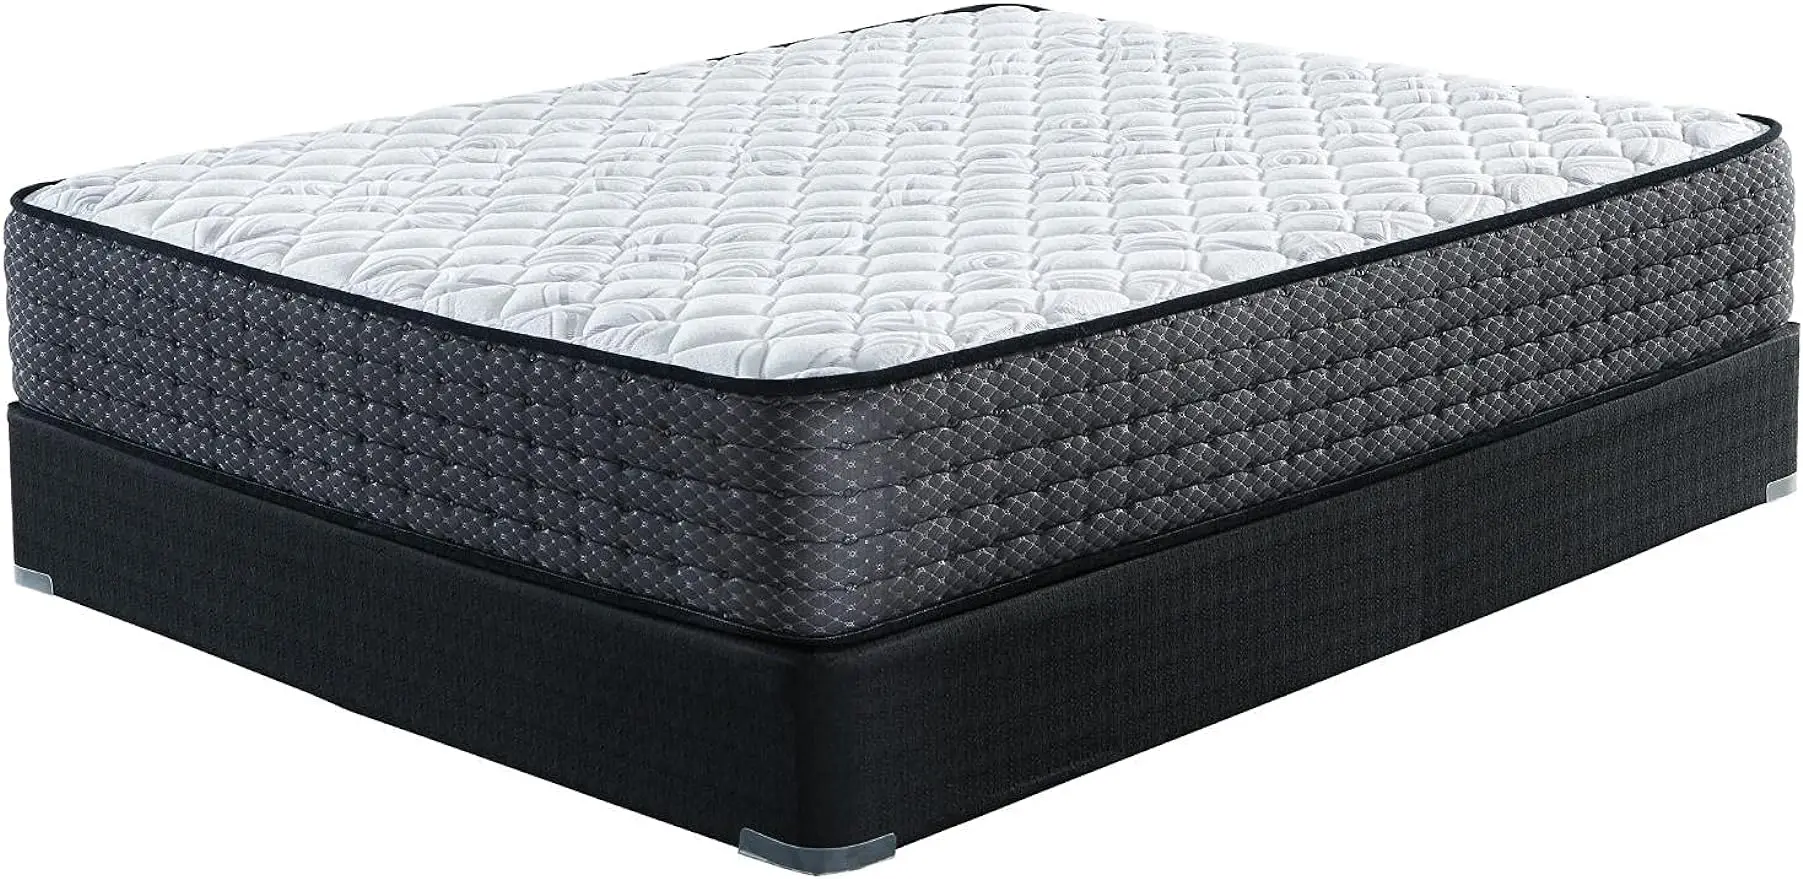 

Queen Size Limited Edition 11 inch Firm Hybrid Mattress with Lumbar Support Gel Memory Foam